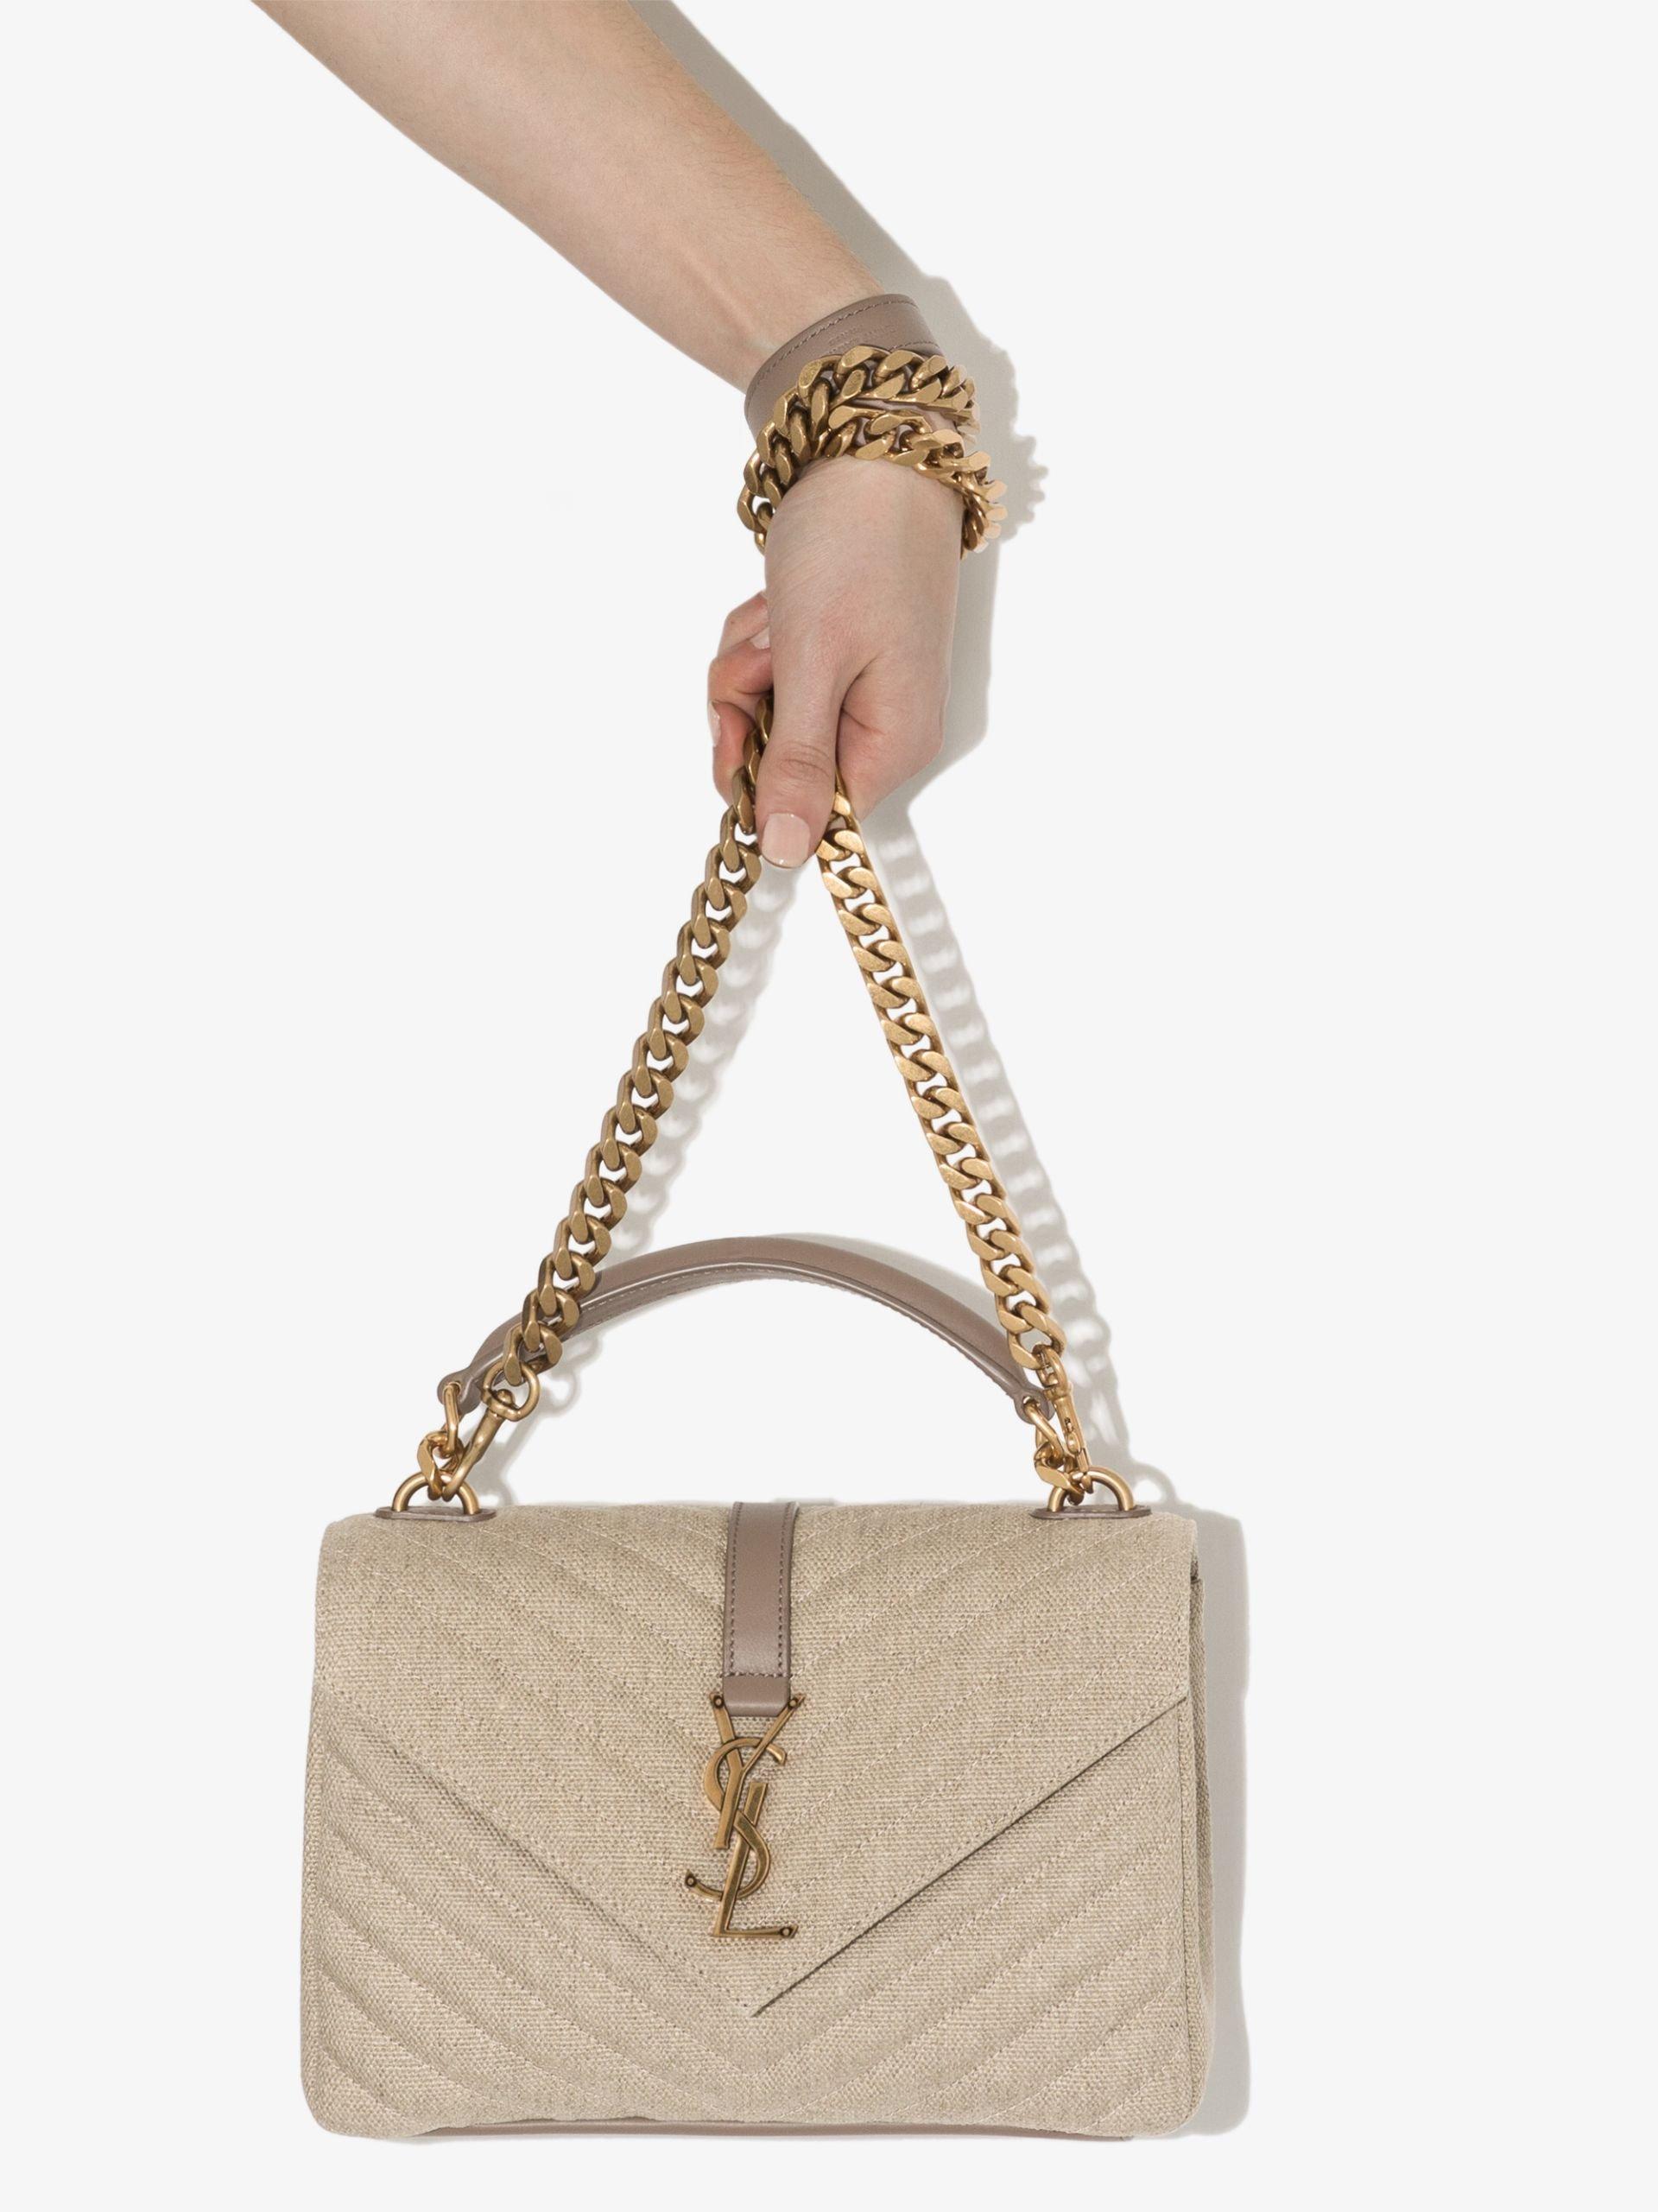 Saint Laurent Neutral College Canvas Cross Body Bag in Natural | Lyst